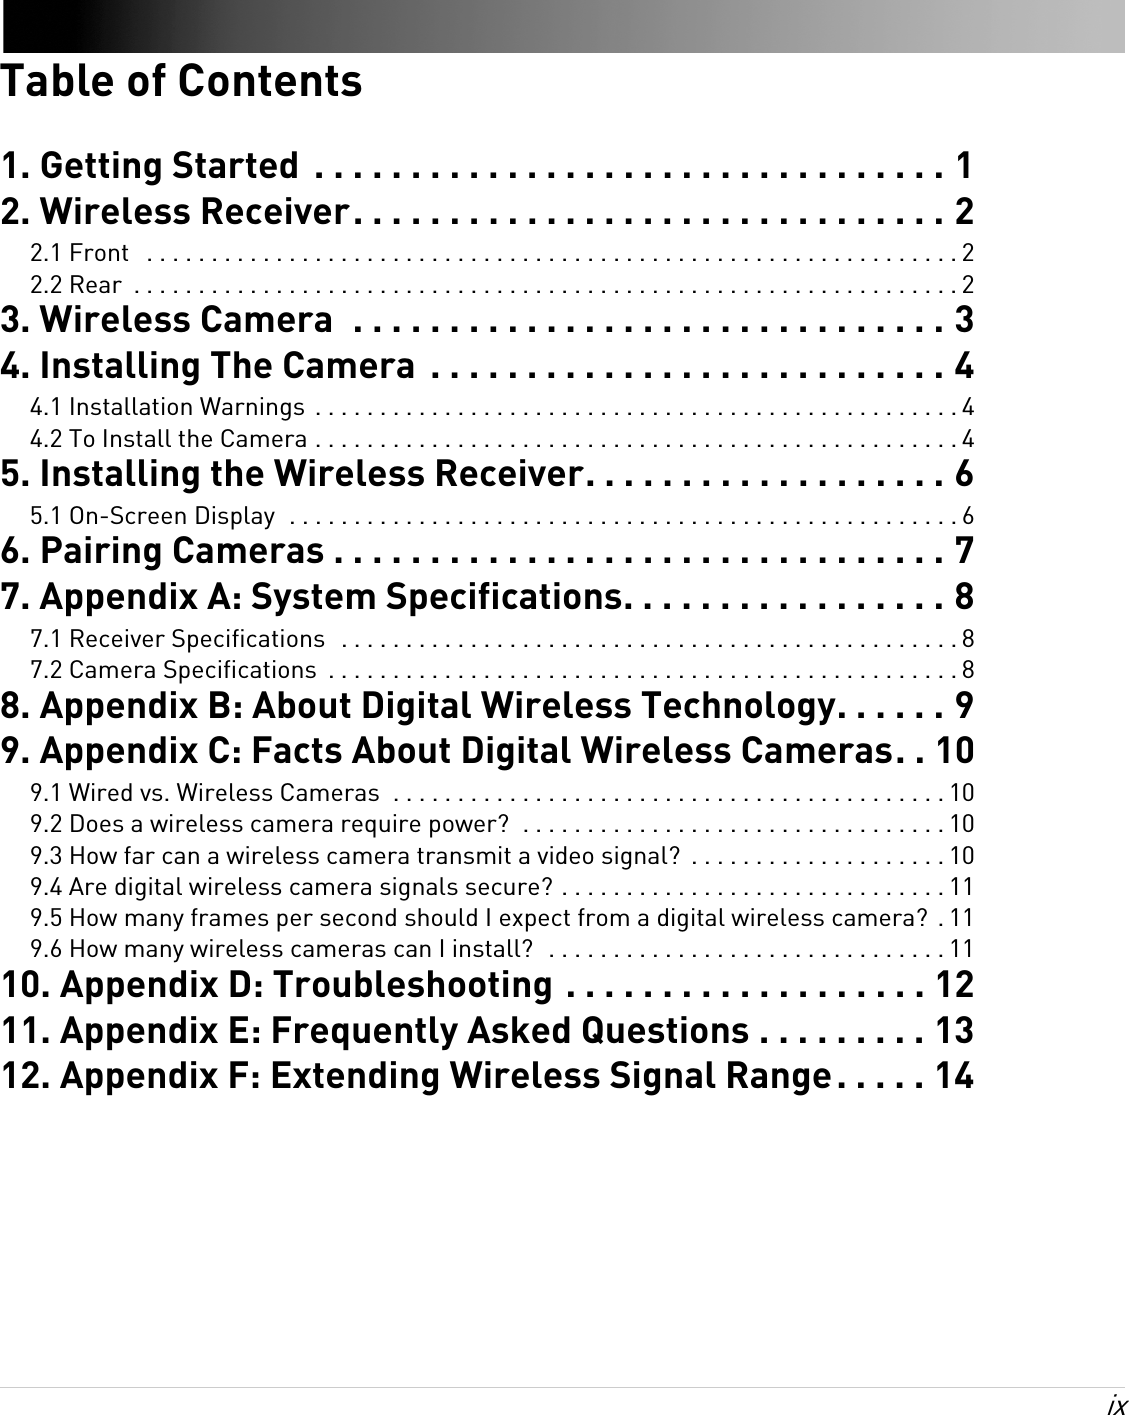 ix Table of Contents1. Getting Started  . . . . . . . . . . . . . . . . . . . . . . . . . . . . . . . . . 12. Wireless Receiver. . . . . . . . . . . . . . . . . . . . . . . . . . . . . . . 22.1 Front   . . . . . . . . . . . . . . . . . . . . . . . . . . . . . . . . . . . . . . . . . . . . . . . . . . . . . . . . . . . . . . . 22.2 Rear  . . . . . . . . . . . . . . . . . . . . . . . . . . . . . . . . . . . . . . . . . . . . . . . . . . . . . . . . . . . . . . . . 23. Wireless Camera  . . . . . . . . . . . . . . . . . . . . . . . . . . . . . . . 34. Installing The Camera  . . . . . . . . . . . . . . . . . . . . . . . . . . . 44.1 Installation Warnings  . . . . . . . . . . . . . . . . . . . . . . . . . . . . . . . . . . . . . . . . . . . . . . . . . . 44.2 To Install the Camera . . . . . . . . . . . . . . . . . . . . . . . . . . . . . . . . . . . . . . . . . . . . . . . . . . 45. Installing the Wireless Receiver. . . . . . . . . . . . . . . . . . . 65.1 On-Screen Display  . . . . . . . . . . . . . . . . . . . . . . . . . . . . . . . . . . . . . . . . . . . . . . . . . . . . 66. Pairing Cameras . . . . . . . . . . . . . . . . . . . . . . . . . . . . . . . . 77. Appendix A: System Specifications. . . . . . . . . . . . . . . . . 87.1 Receiver Specifications  . . . . . . . . . . . . . . . . . . . . . . . . . . . . . . . . . . . . . . . . . . . . . . . . 87.2 Camera Specifications  . . . . . . . . . . . . . . . . . . . . . . . . . . . . . . . . . . . . . . . . . . . . . . . . . 88. Appendix B: About Digital Wireless Technology. . . . . . 99. Appendix C: Facts About Digital Wireless Cameras. . 109.1 Wired vs. Wireless Cameras  . . . . . . . . . . . . . . . . . . . . . . . . . . . . . . . . . . . . . . . . . . . 109.2 Does a wireless camera require power?  . . . . . . . . . . . . . . . . . . . . . . . . . . . . . . . . . 109.3 How far can a wireless camera transmit a video signal?  . . . . . . . . . . . . . . . . . . . . 109.4 Are digital wireless camera signals secure? . . . . . . . . . . . . . . . . . . . . . . . . . . . . . . 119.5 How many frames per second should I expect from a digital wireless camera?  . 119.6 How many wireless cameras can I install?  . . . . . . . . . . . . . . . . . . . . . . . . . . . . . . . 1110. Appendix D: Troubleshooting . . . . . . . . . . . . . . . . . . . 1211. Appendix E: Frequently Asked Questions . . . . . . . . . 1312. Appendix F: Extending Wireless Signal Range. . . . . 14